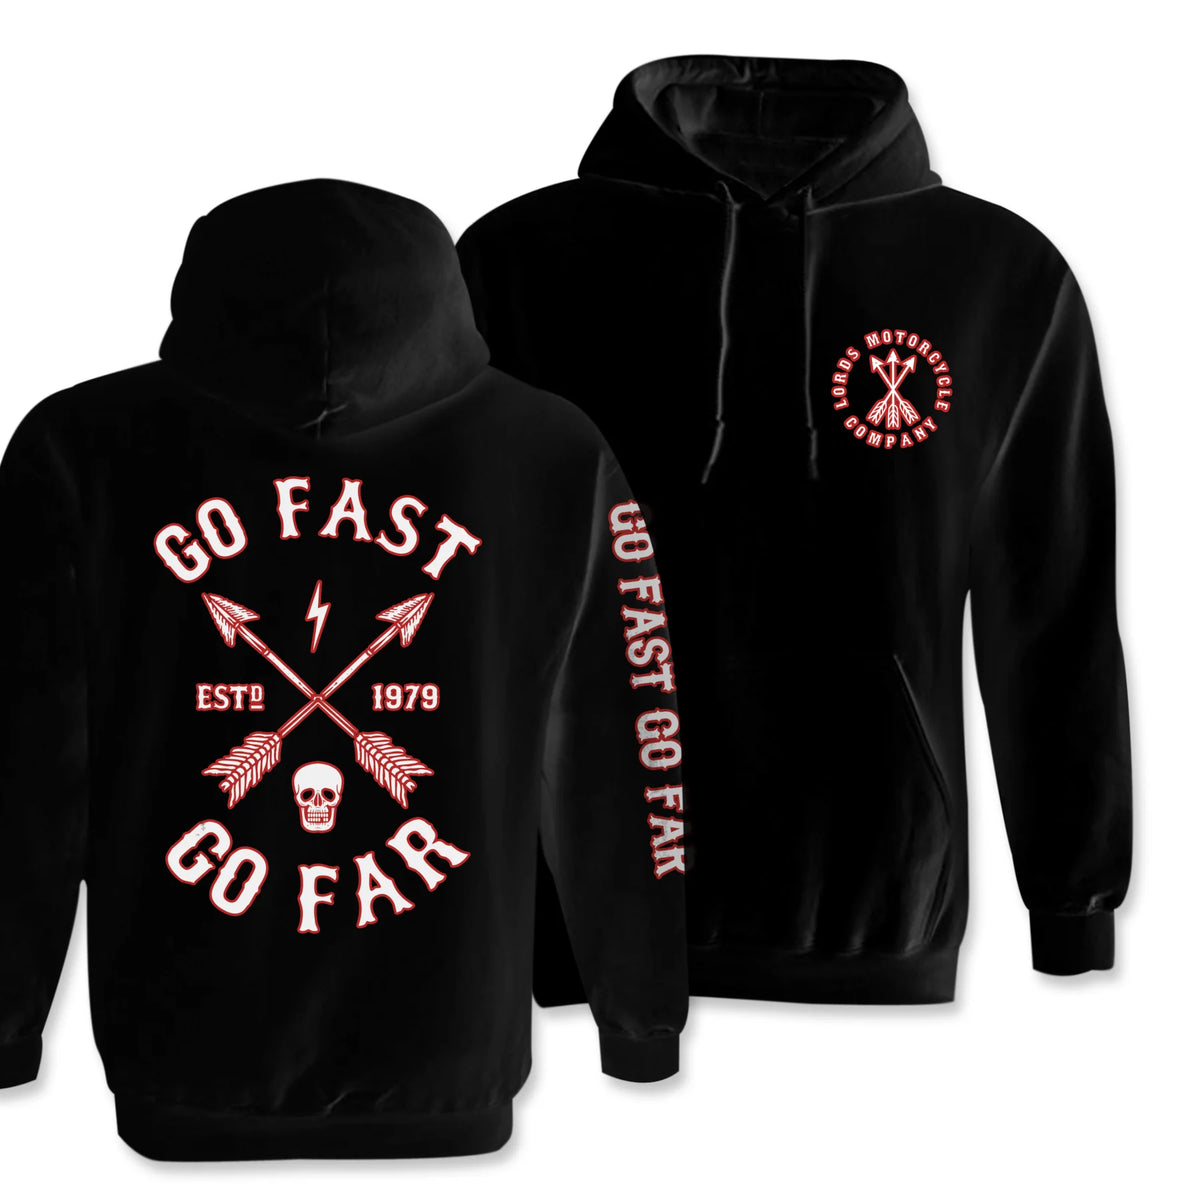 LORDS-OF-GASTOWN-GO-FAST-GO-FAR-PULLOVER-HOODIE - PULLOVER HOODIE - Synik Clothing - synikclothing.com